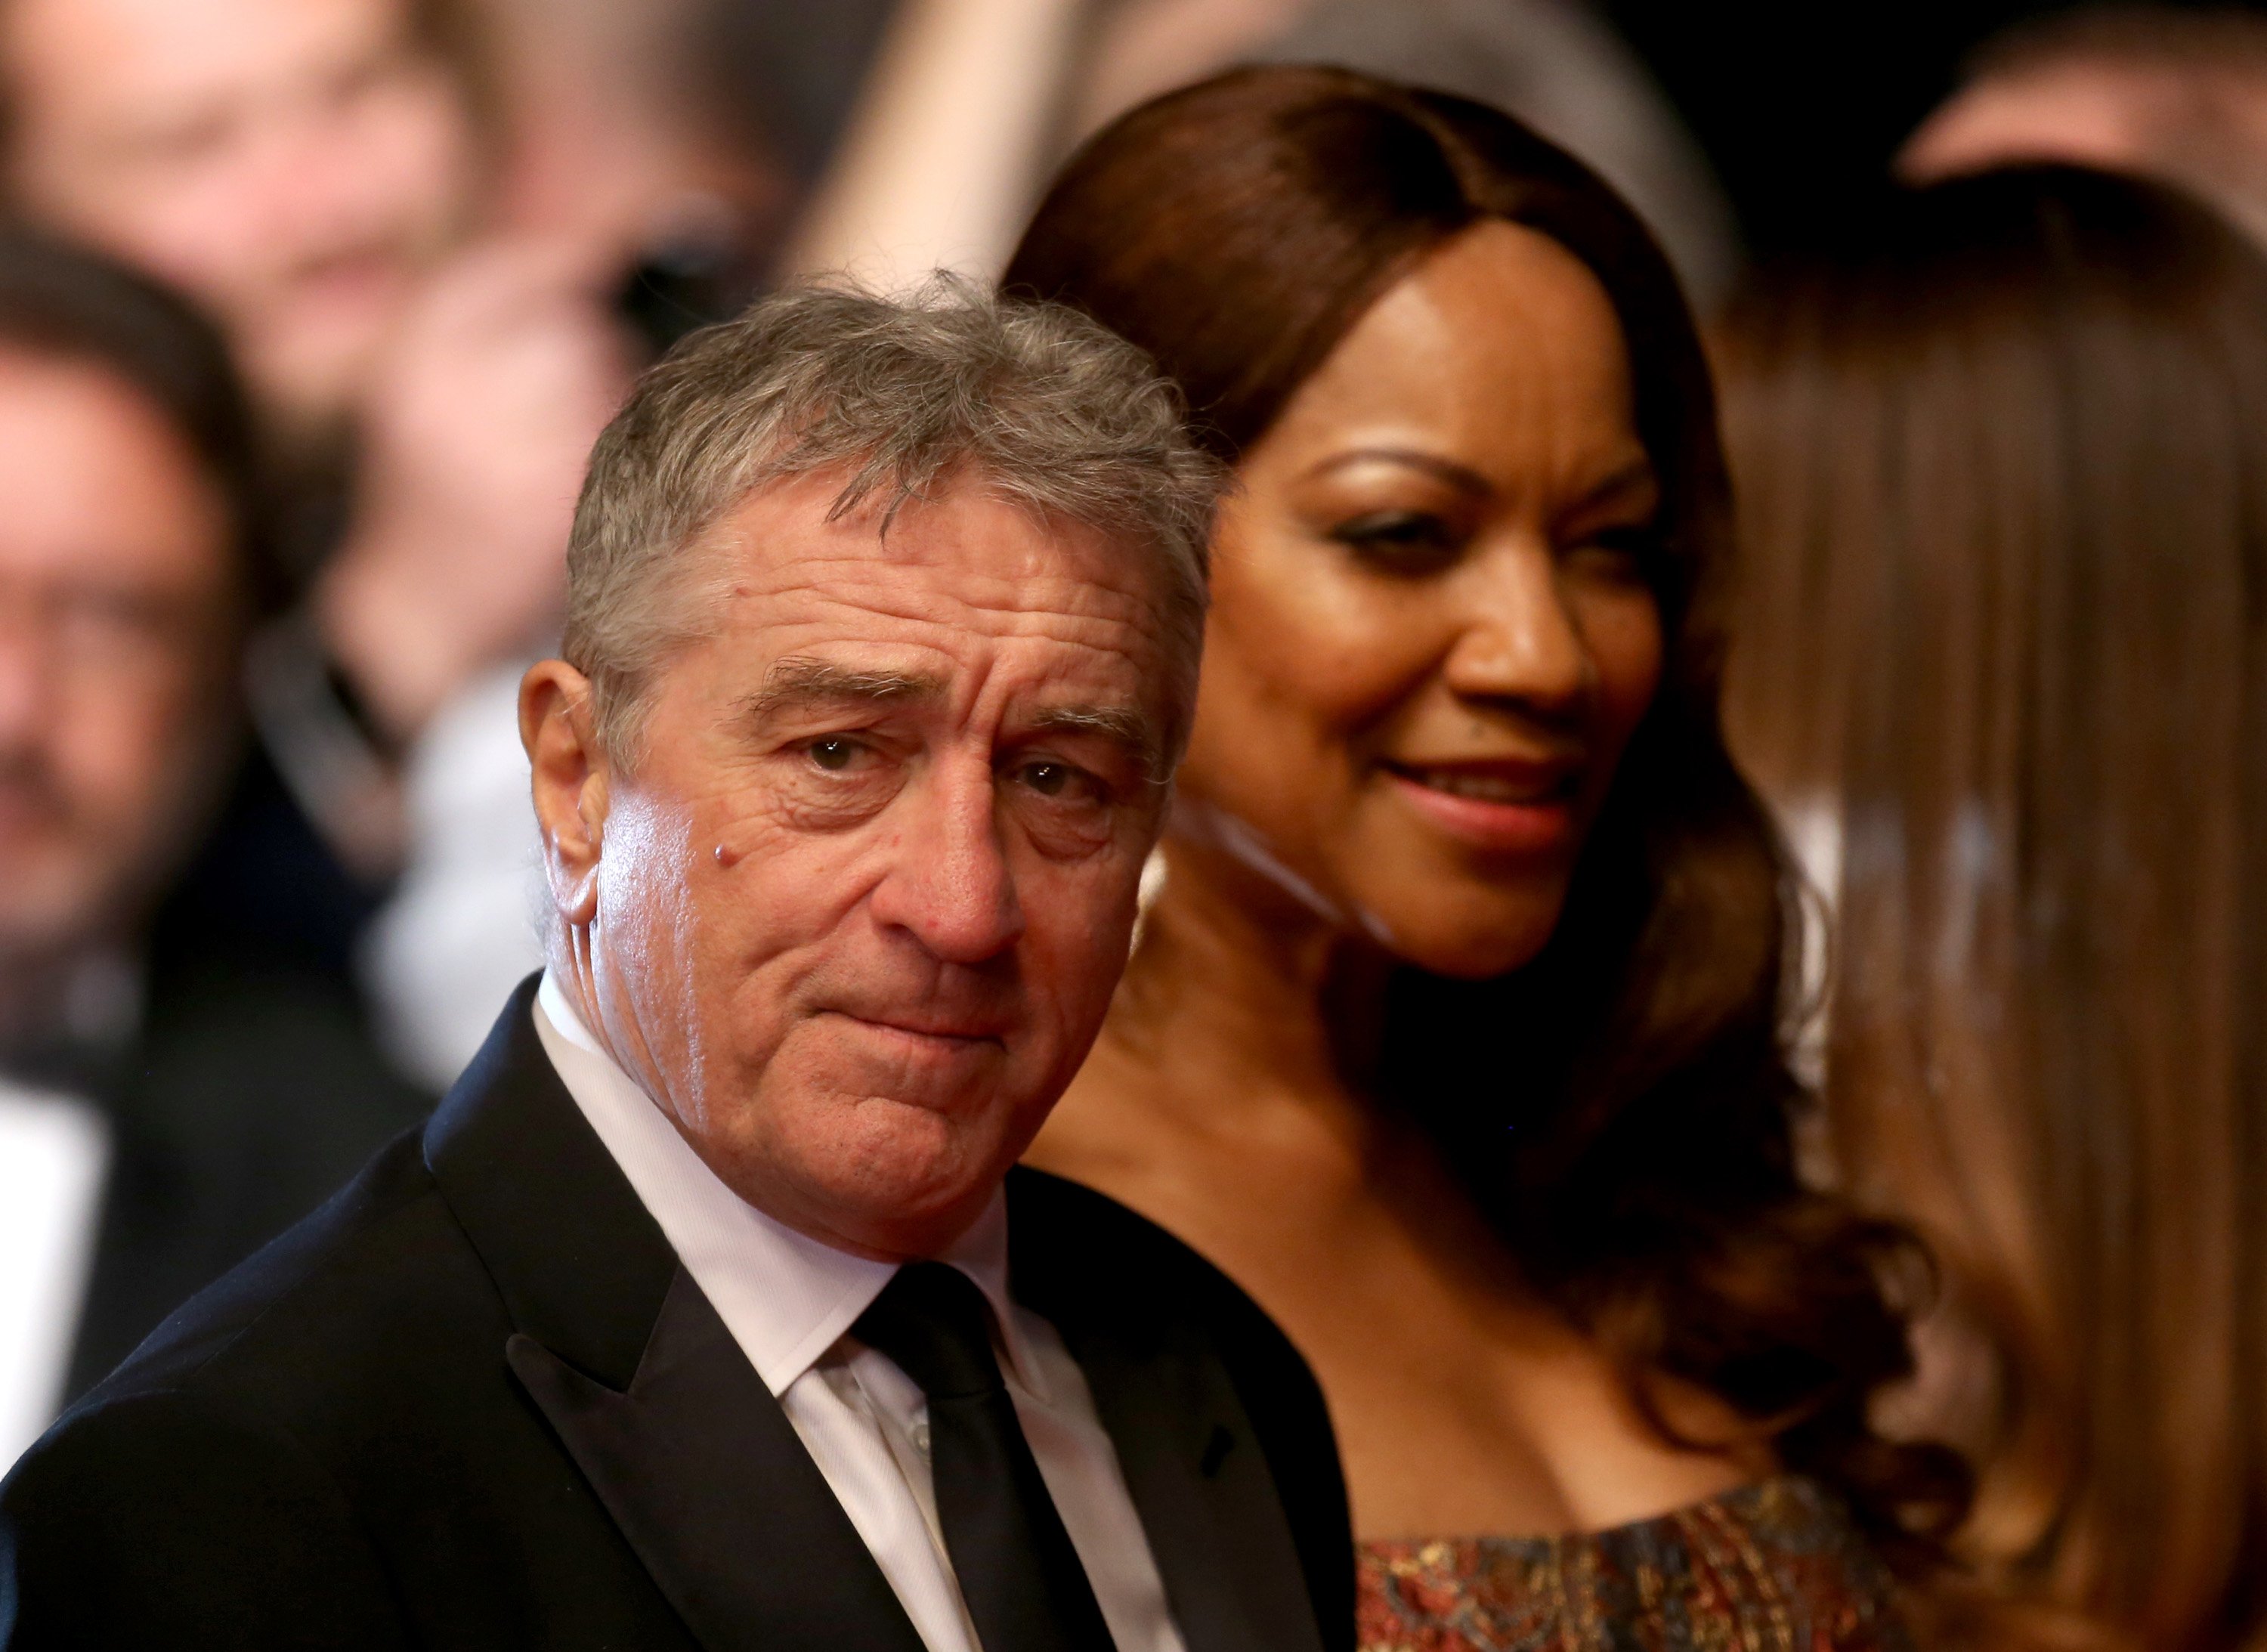 Robert de Niro and his wife Grace Hightower attend a screening of "Hands Of Stone" at the annual 69th Cannes Film Festival at Palais des Festivals on May 16, 2016 in Cannes, France | Source: Getty Images 